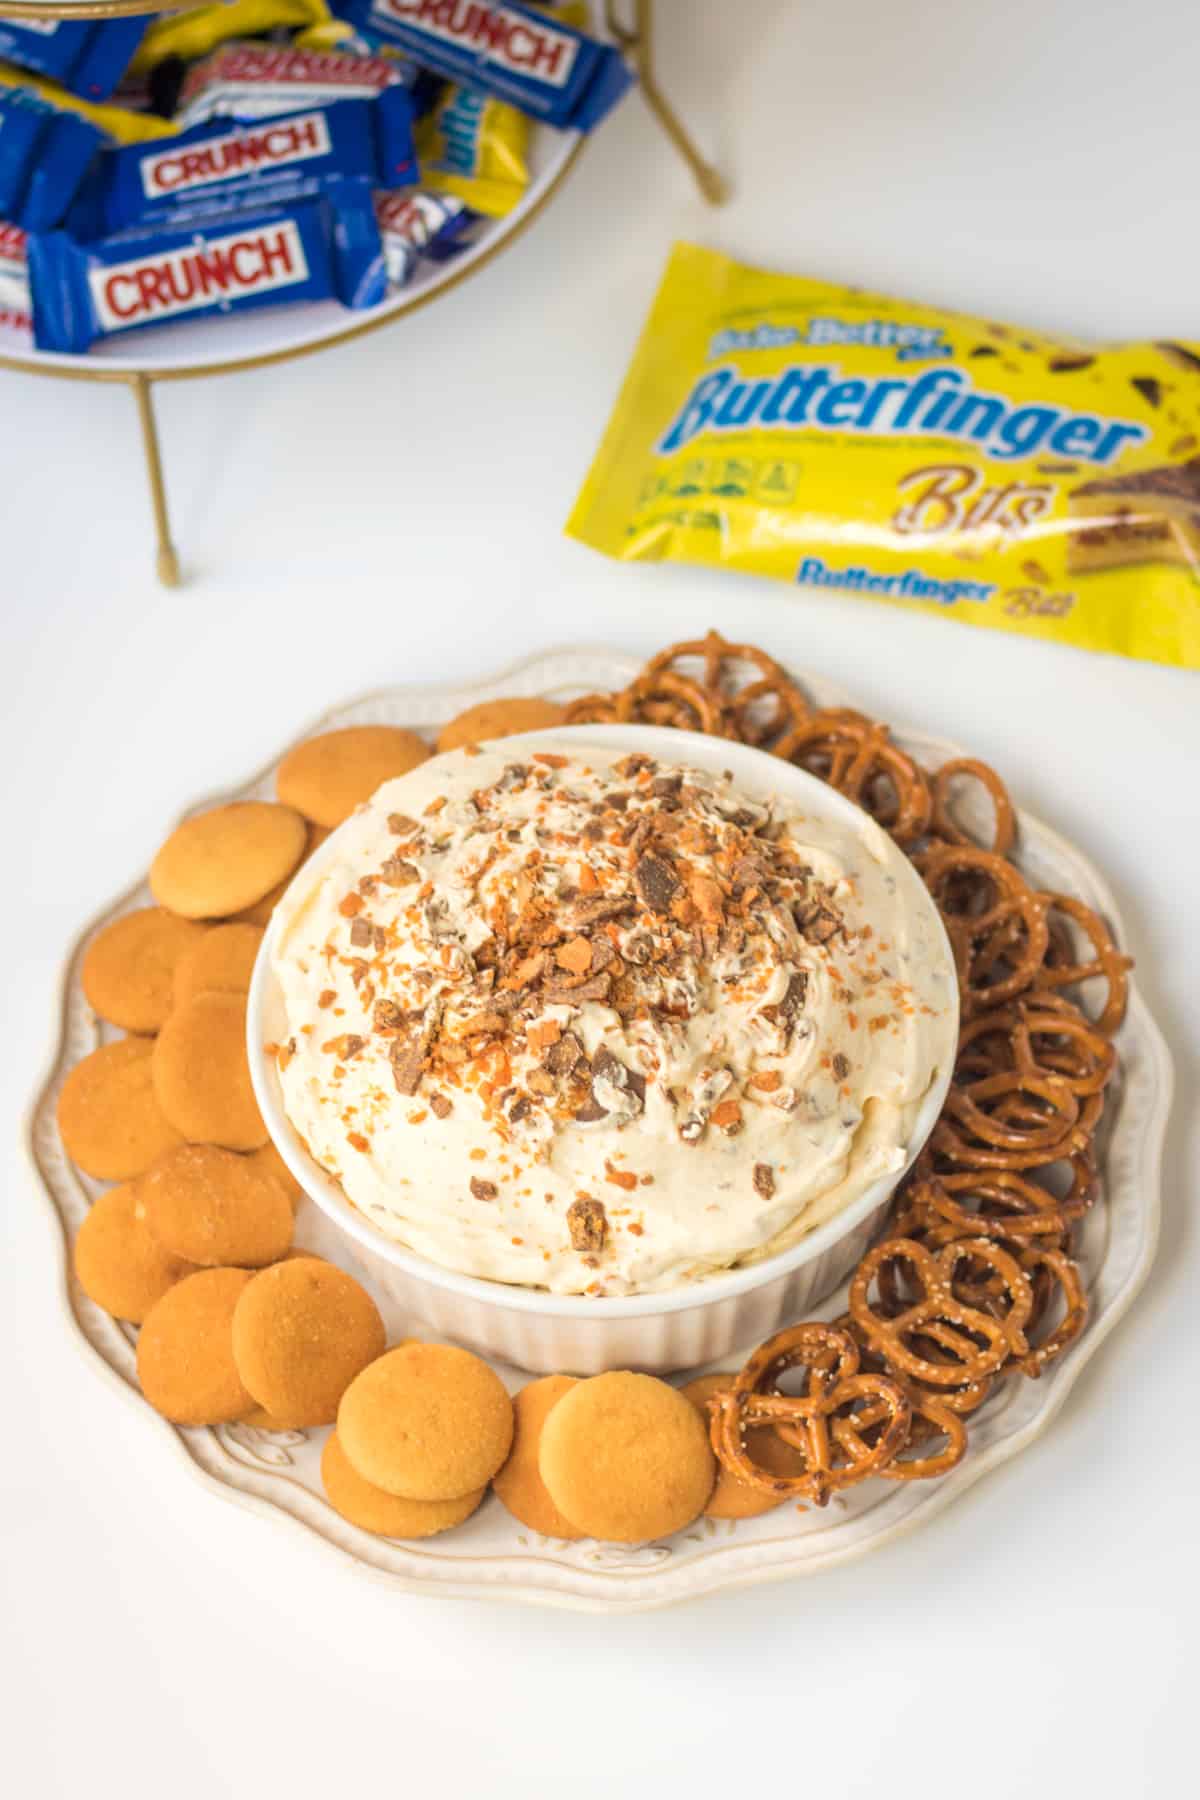 No-bake dessert dip with Butterfinger pieces in it, served with vanilla wafer cookies and pretzel twists for dipping. Bag of Butterfinger Baking bits and fun size Crunch and Butterfinger bars in background